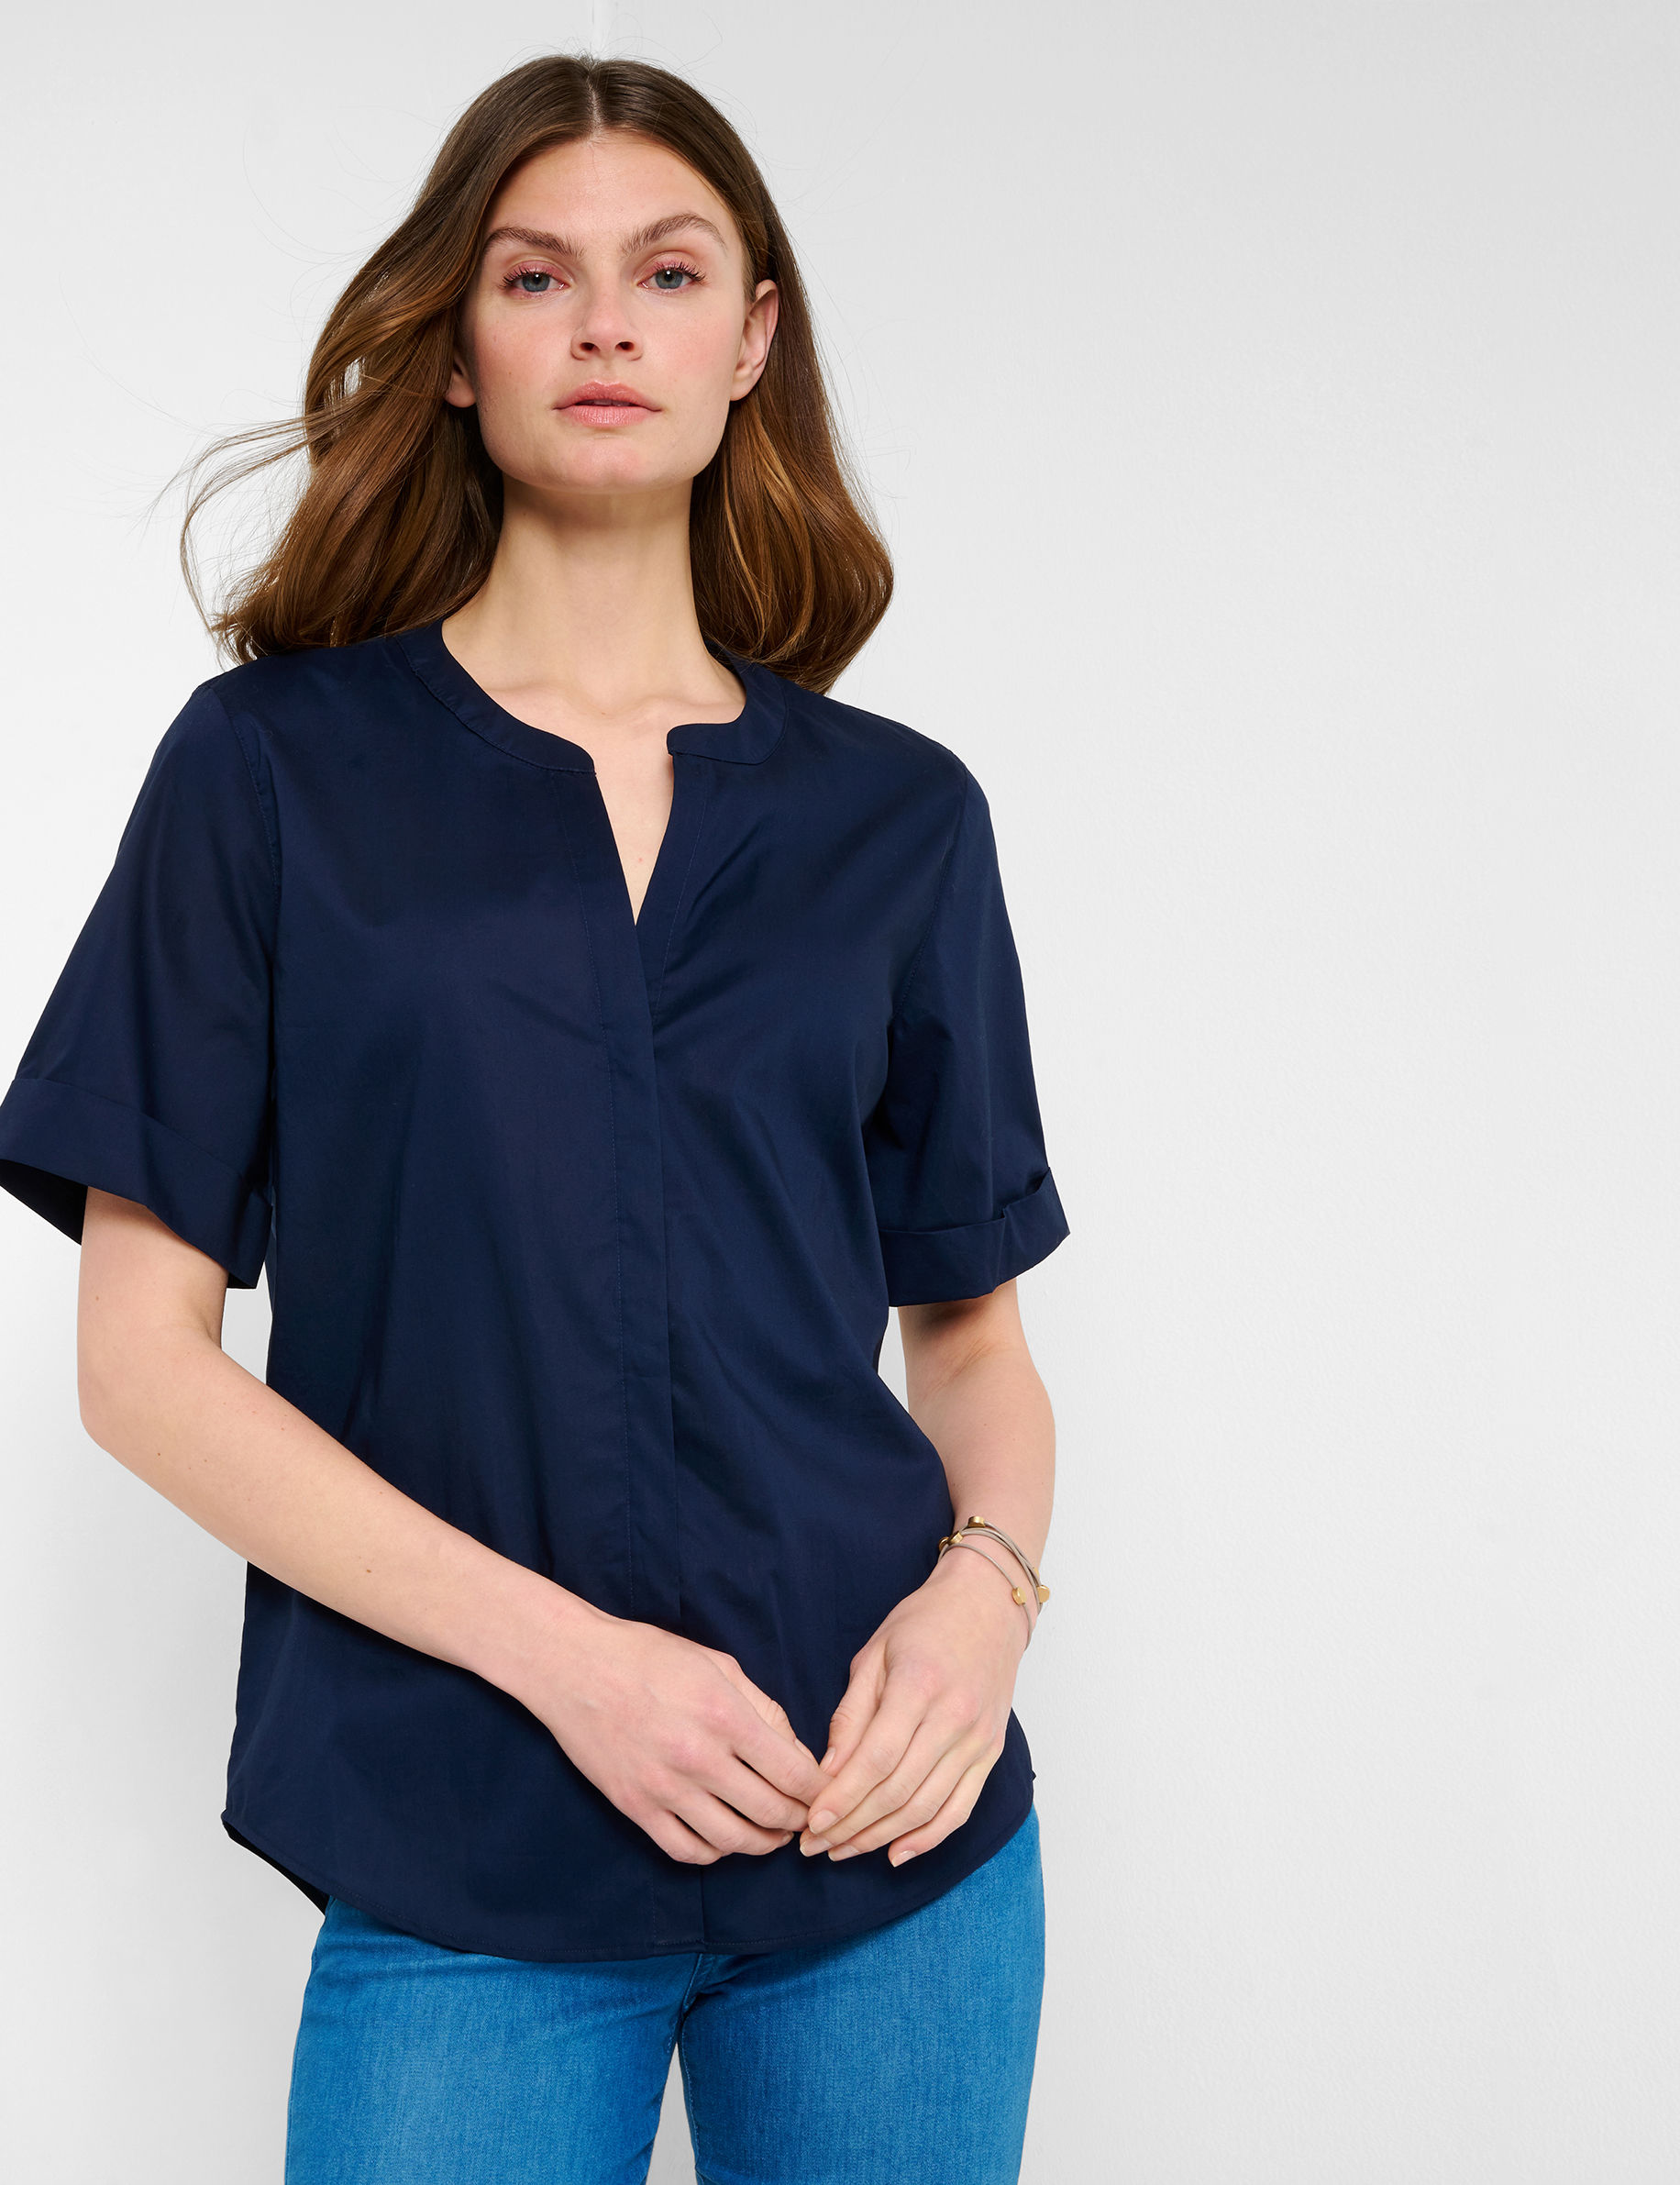 Shades of Blue, Women, Style VERI, MODEL_FRONT_ISHOP